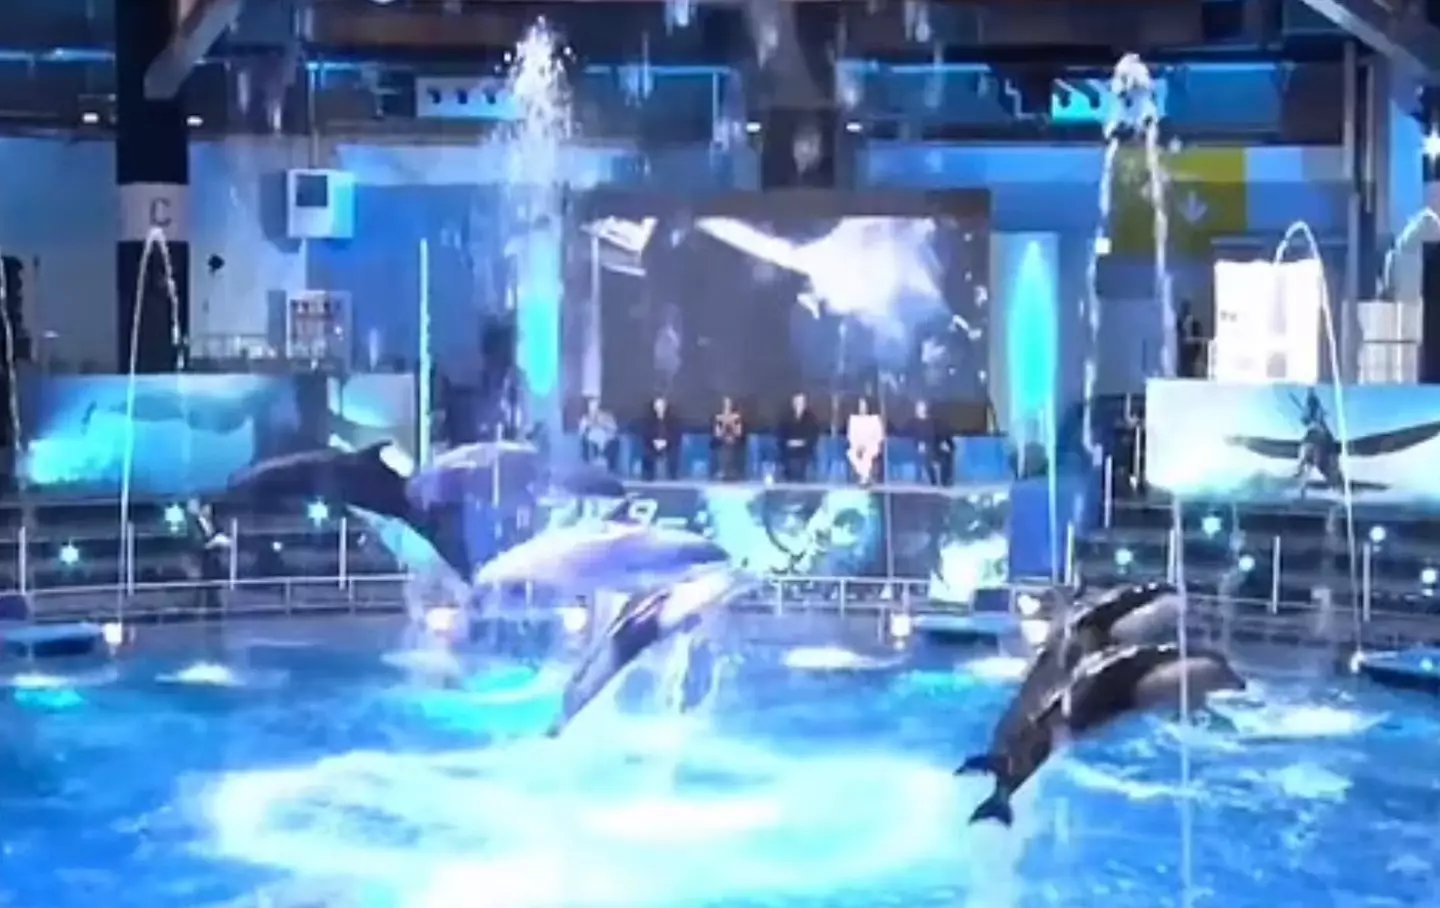 James Cameron took part in a press conference at a dolphin show.